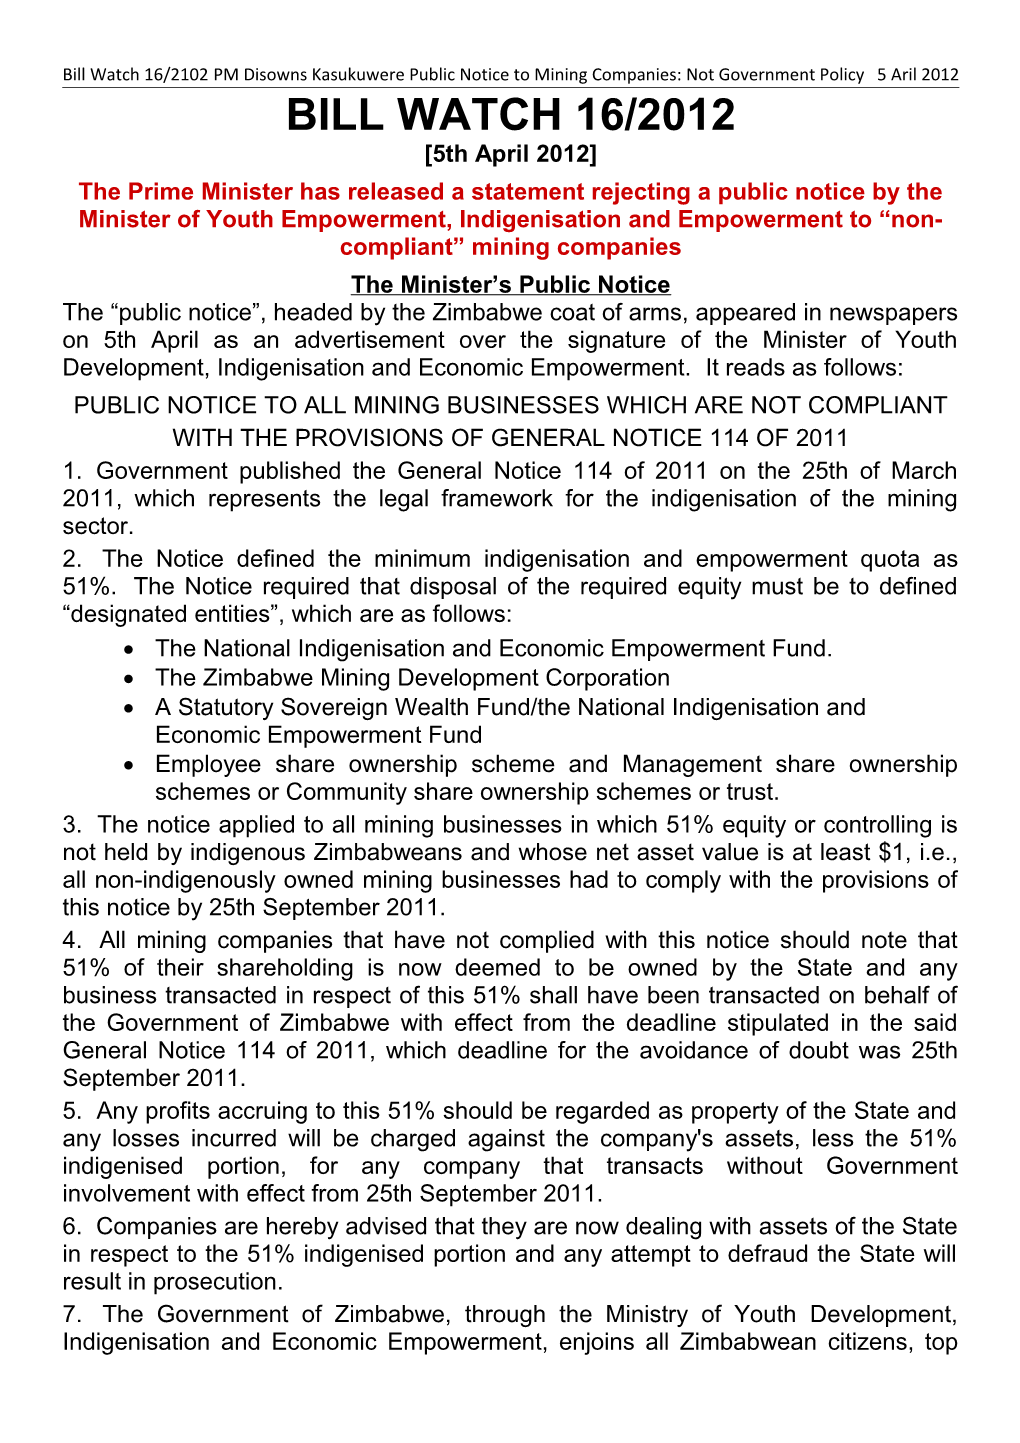 The Minister S Public Notice